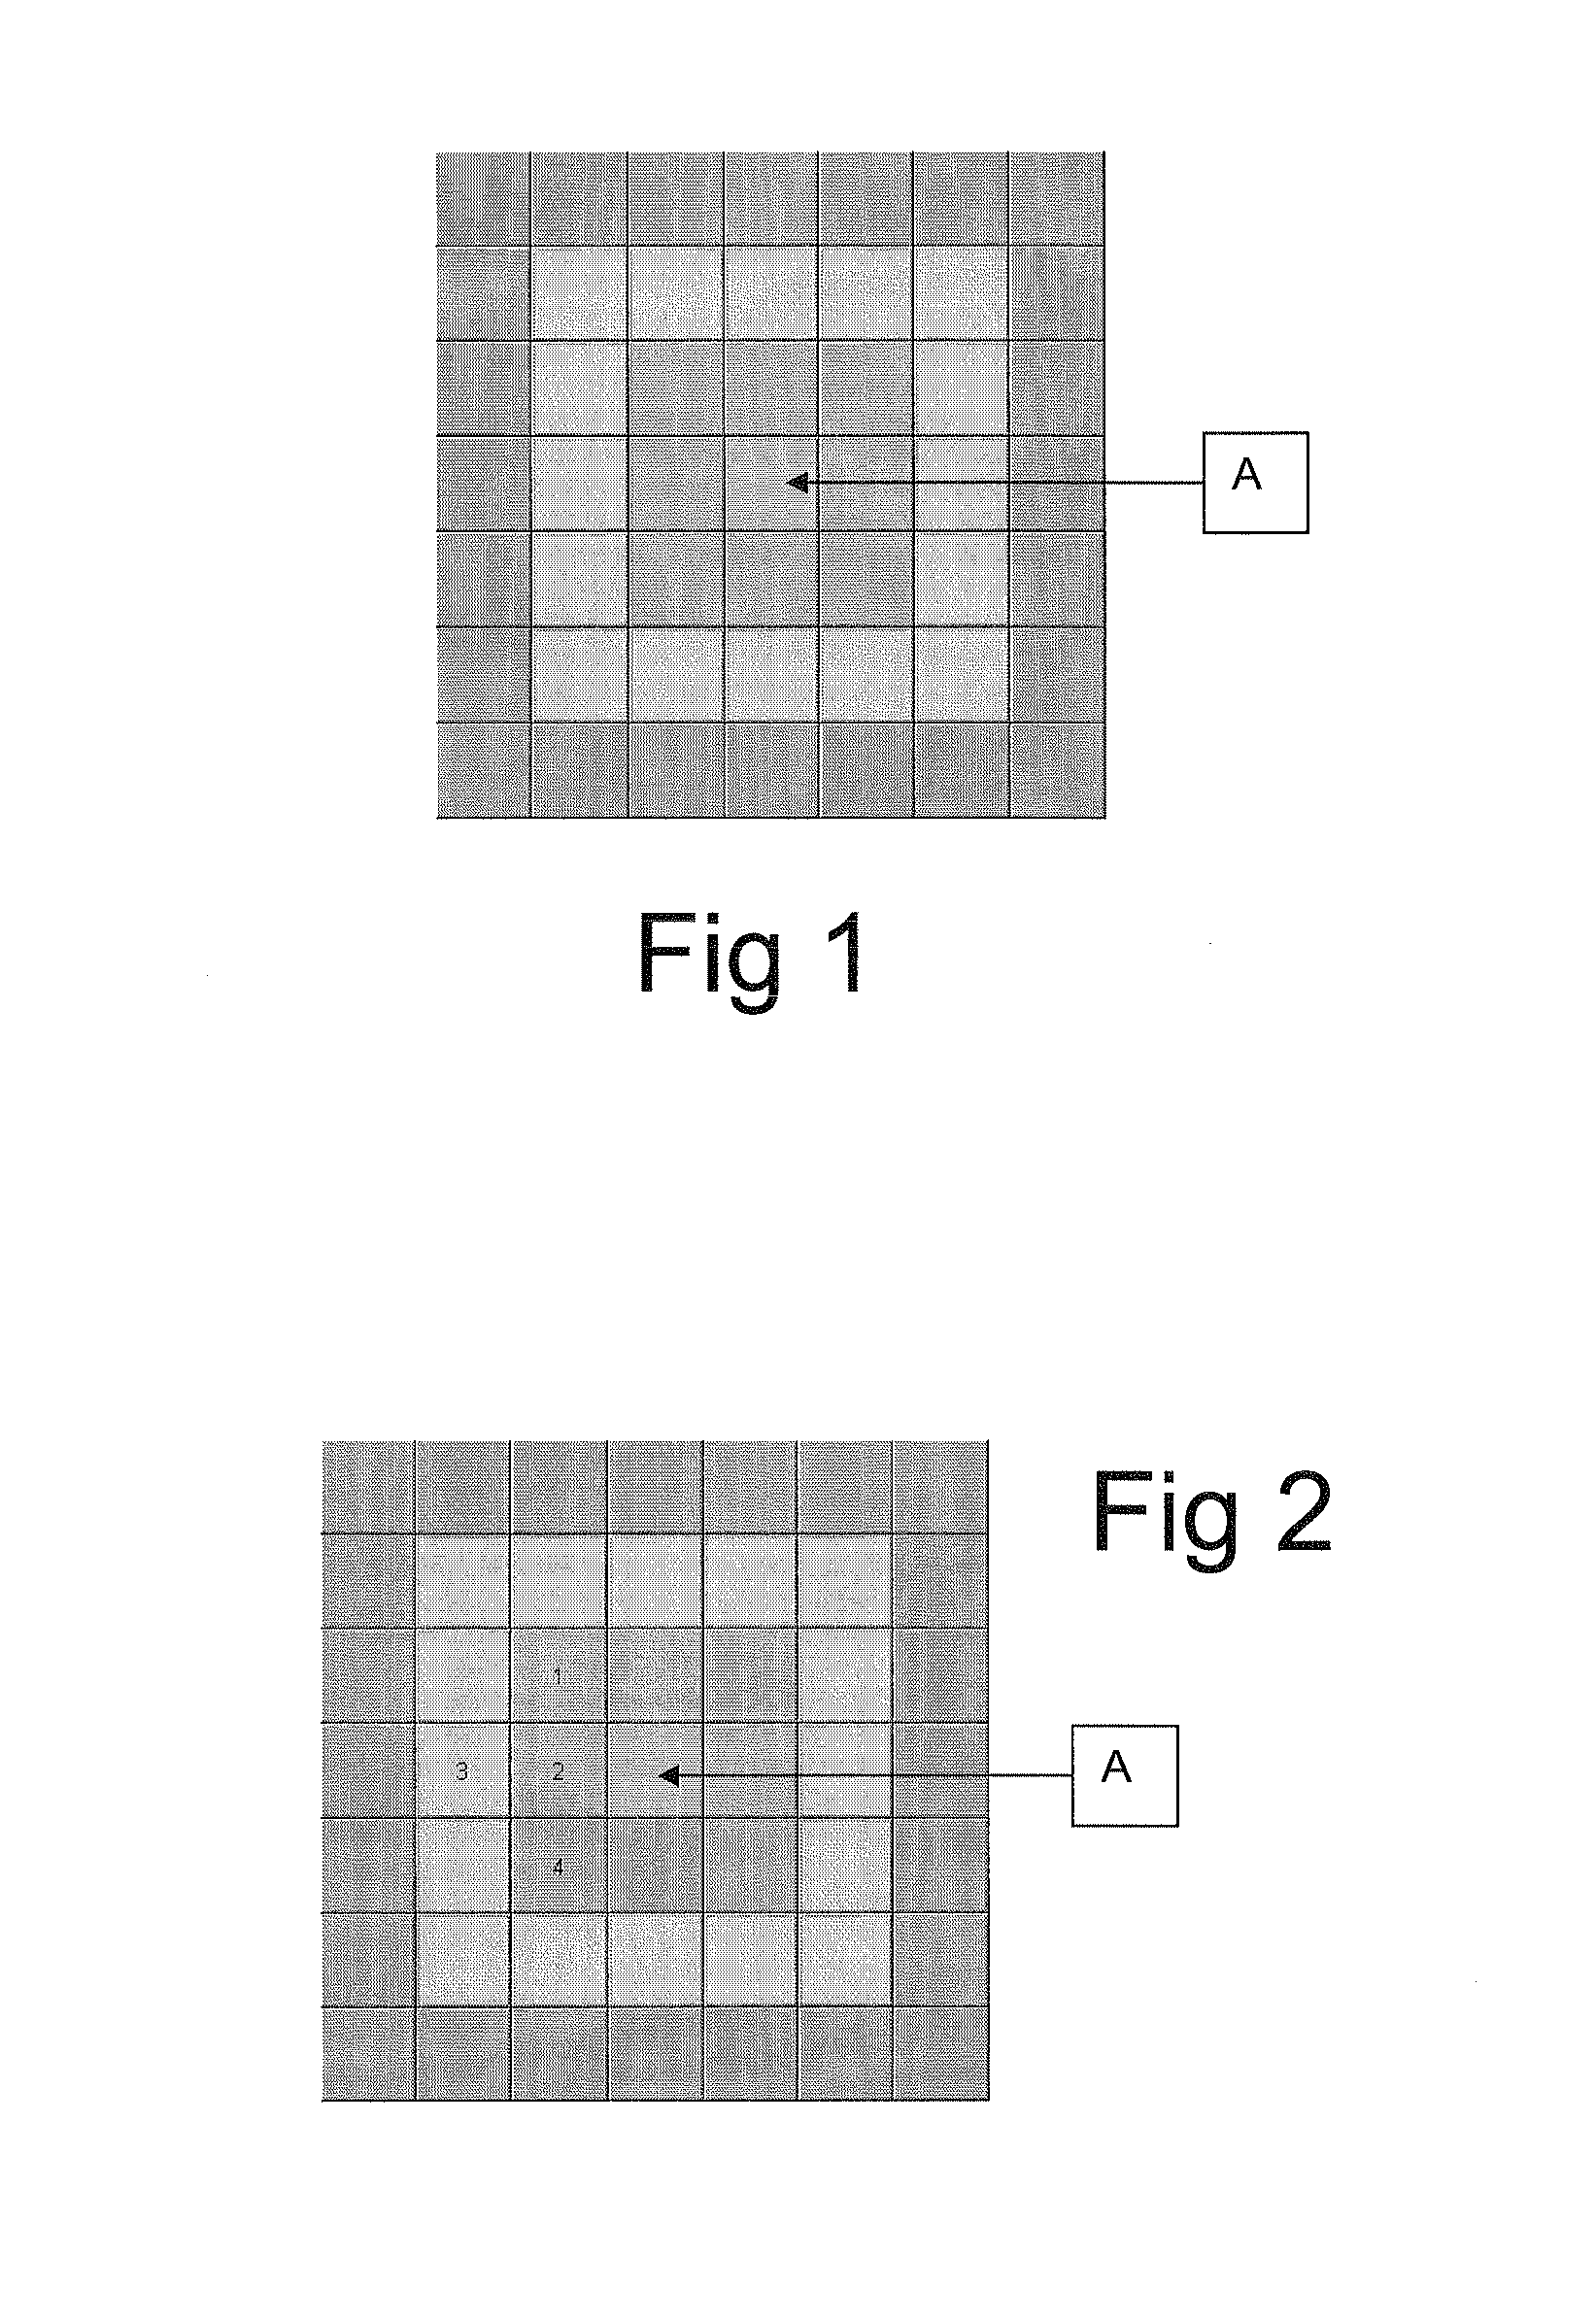 Method and apparatus for verifying a person's identity or entitlement using one-time transaction codes